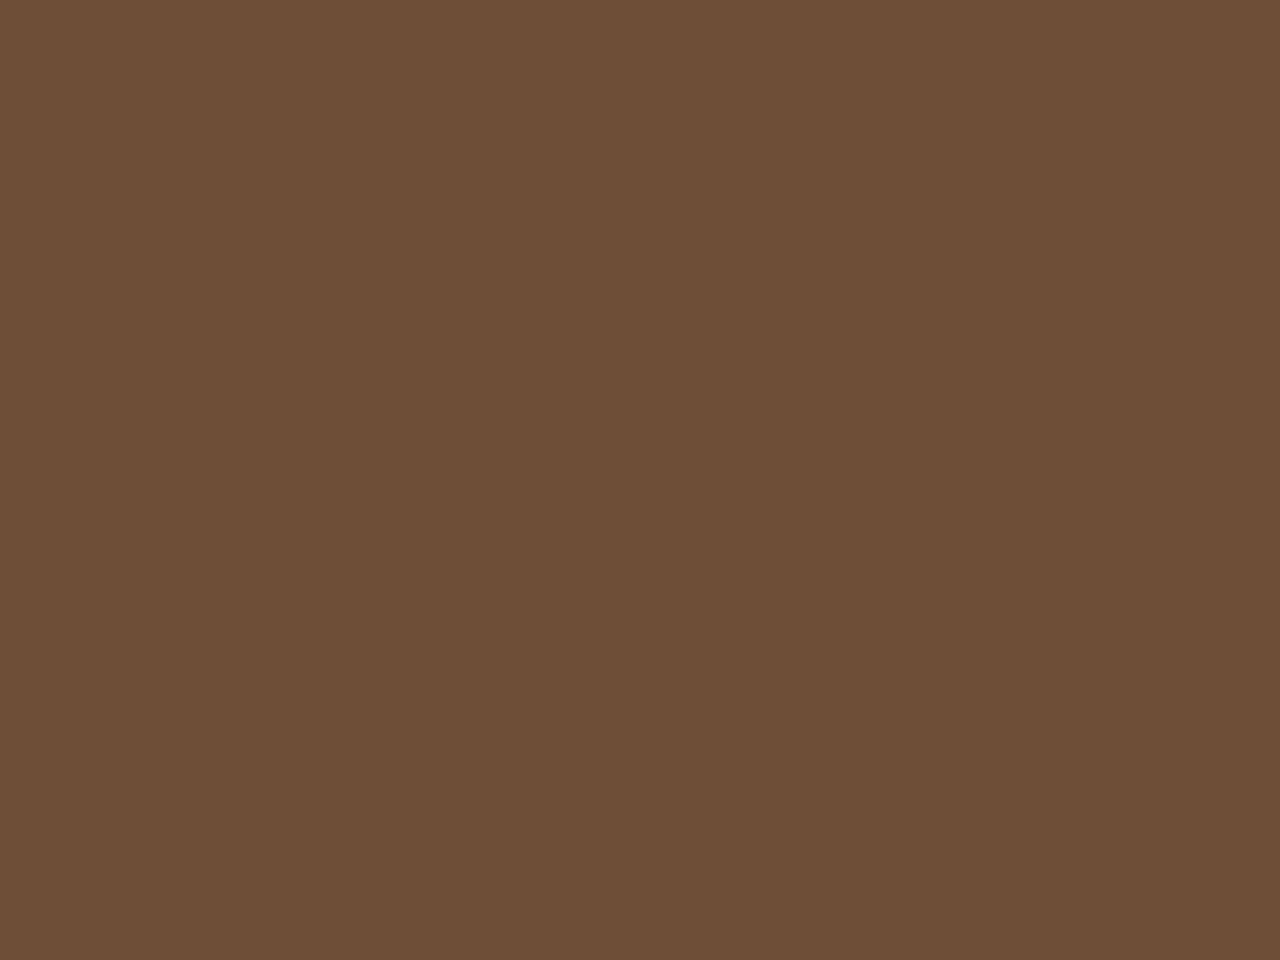 1280x960 Coffee Solid Color Background